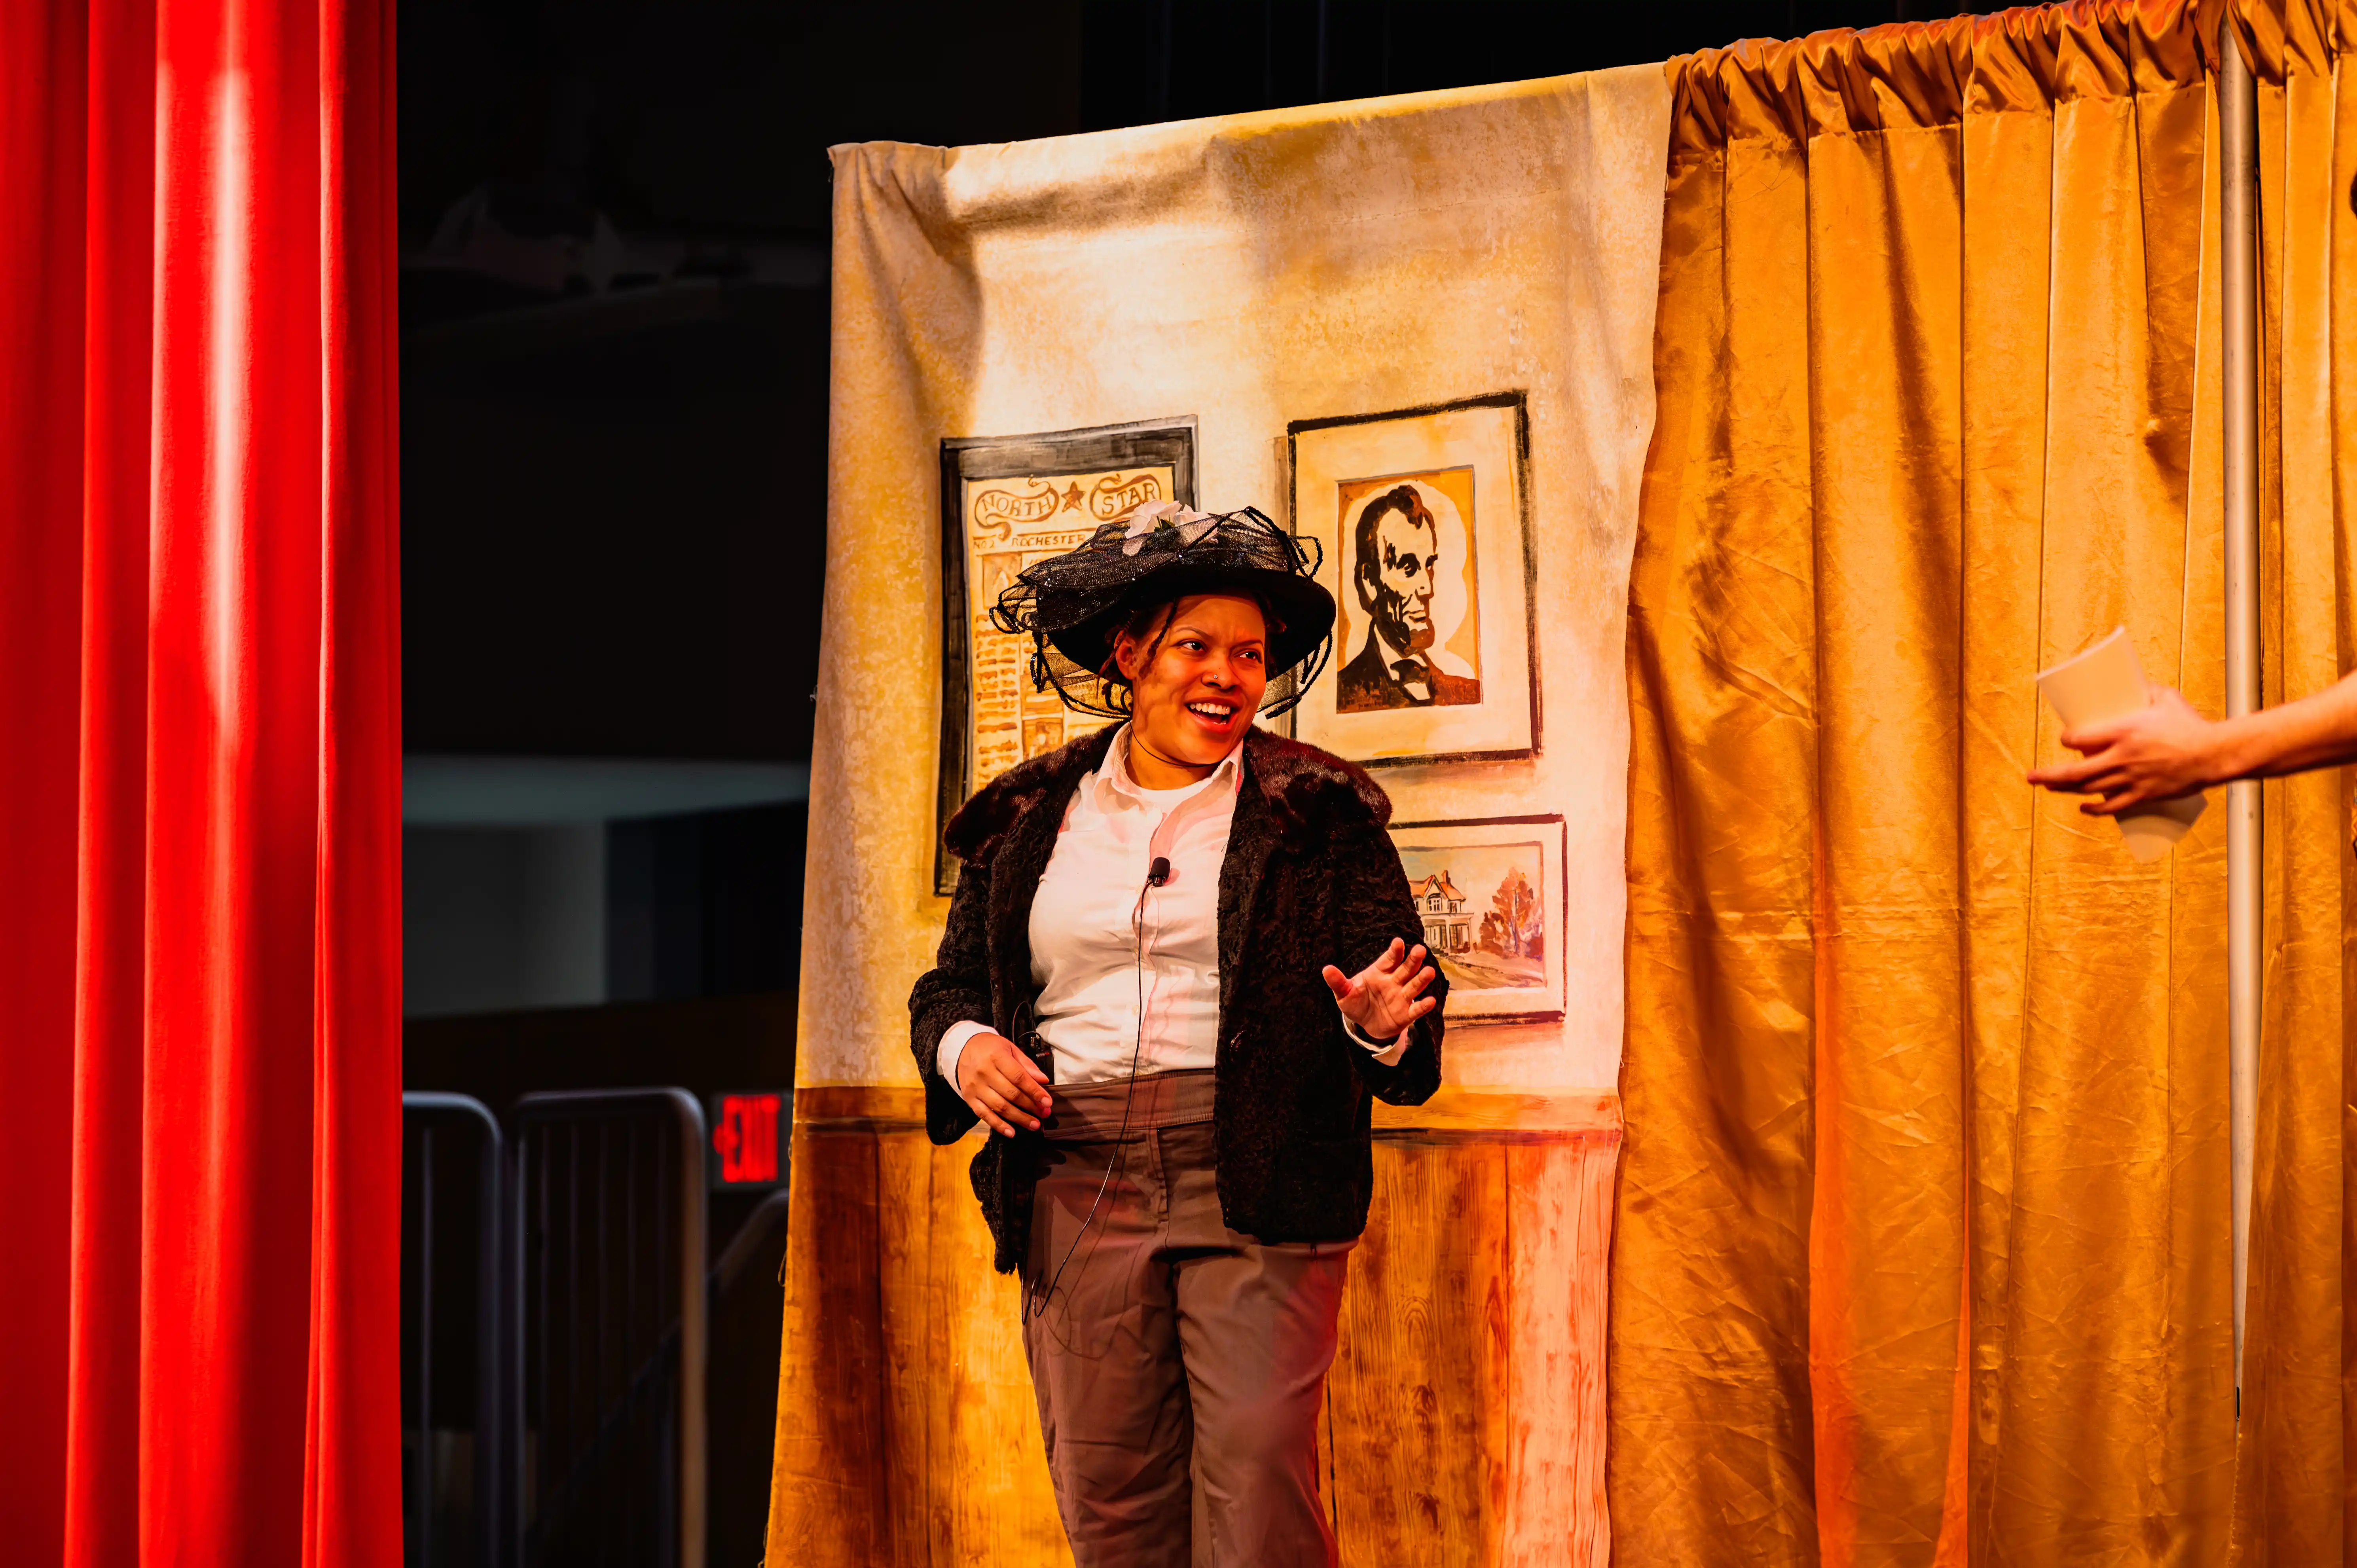 Performer on stage wearing a large hat, surrounded by curtains and framed pictures, with another person's hand visible to the side.